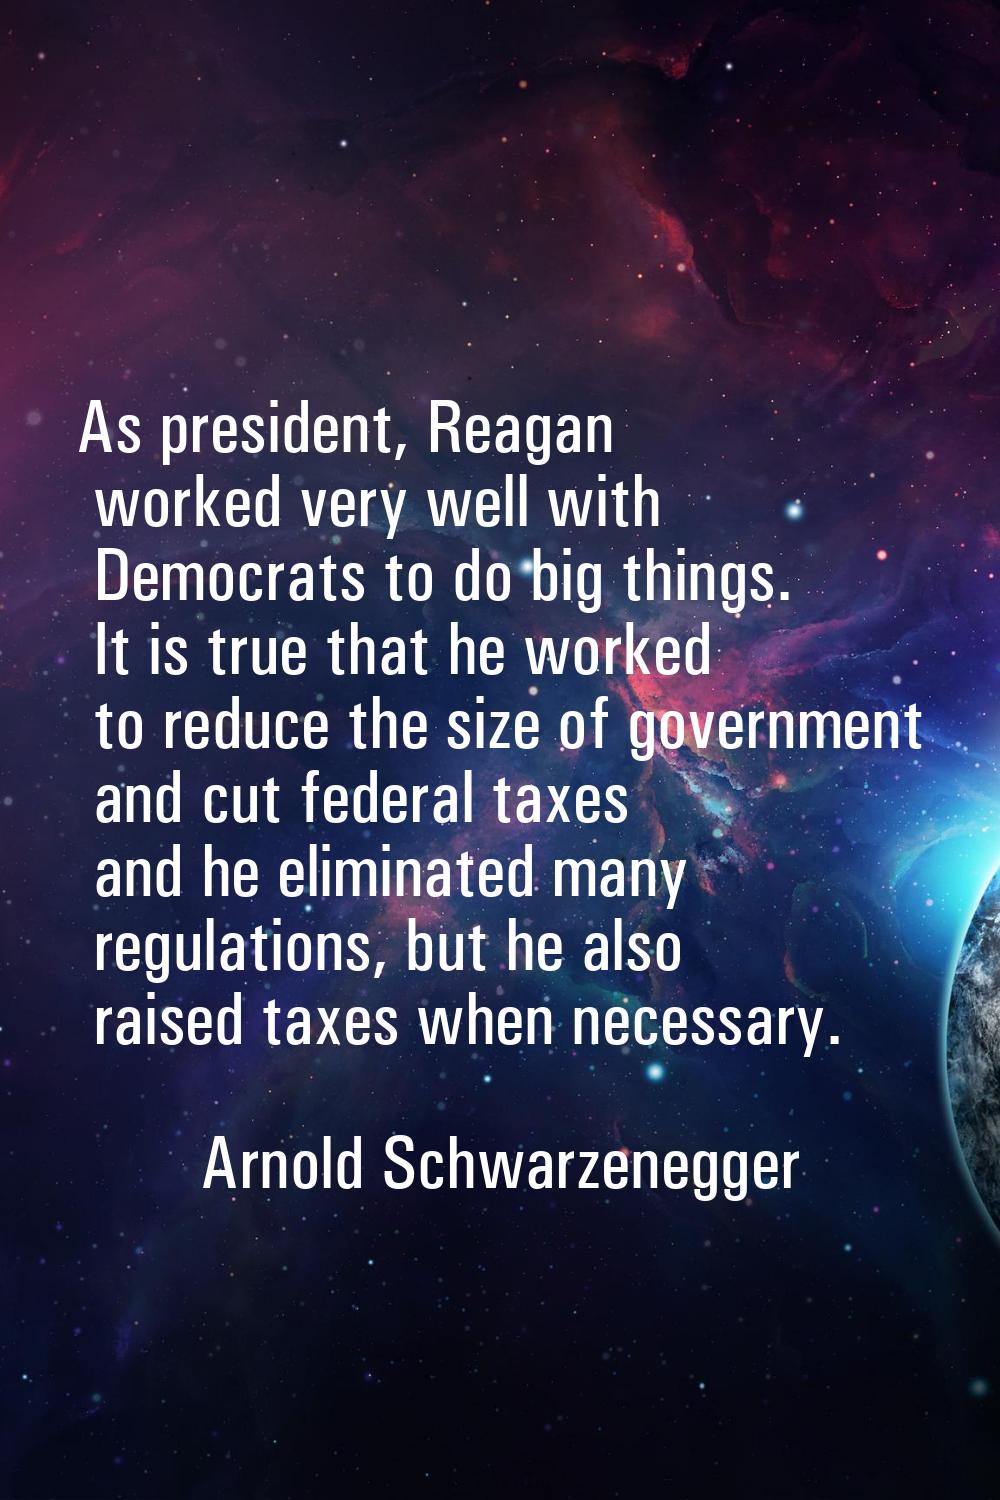 As president, Reagan worked very well with Democrats to do big things. It is true that he worked to